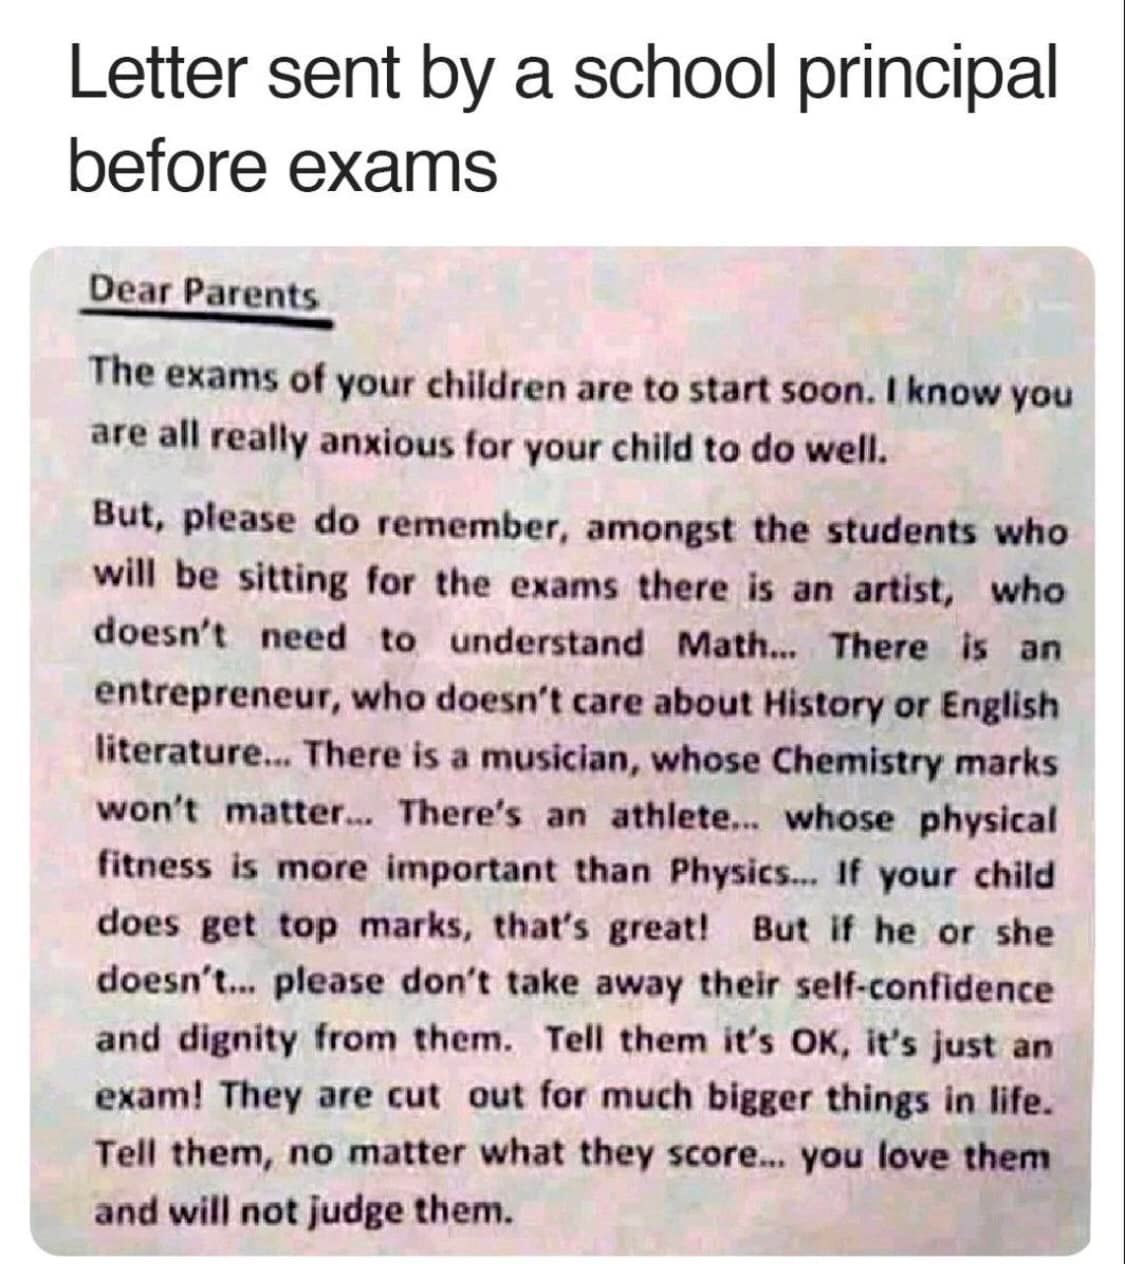 picture of letter sent by school principal before exams